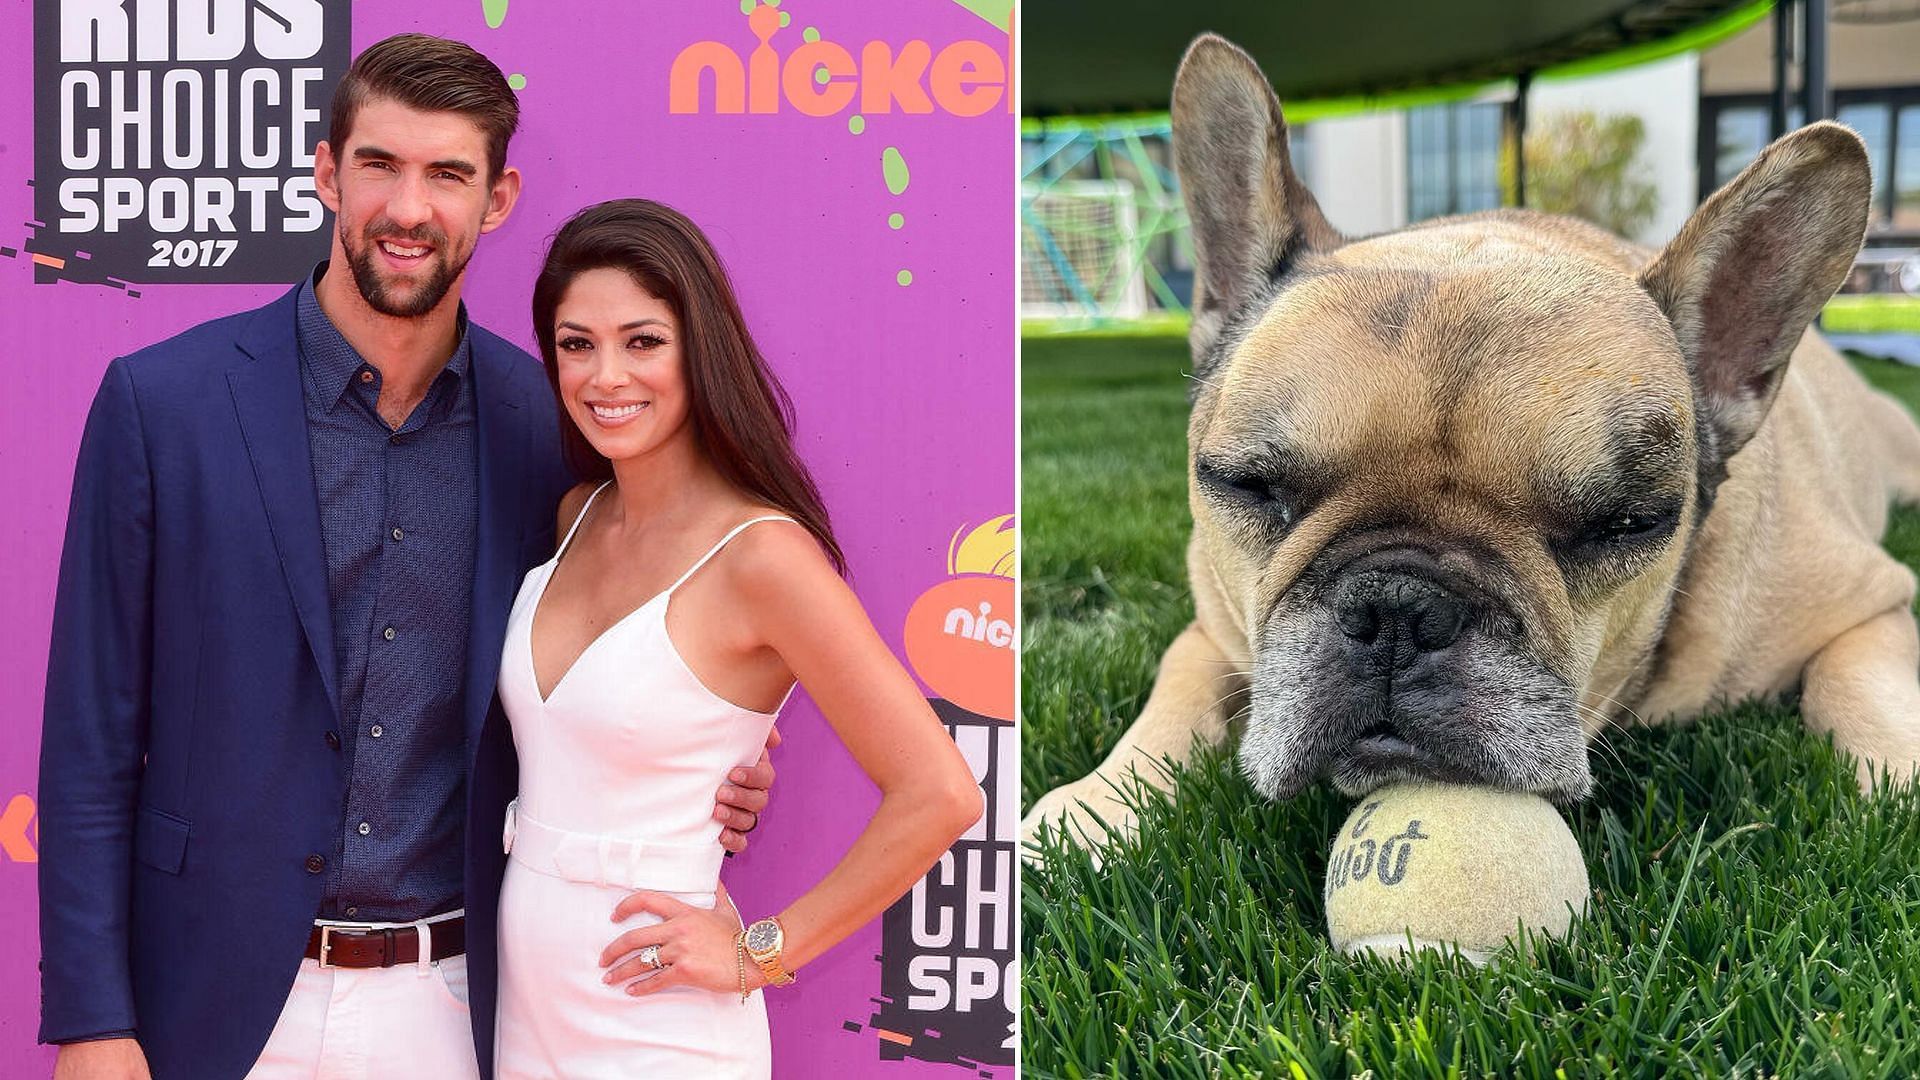 Michael Phelps and Nicole Phelps (L) and their pet Juno (R) (Image via Getty Images) and (Image via Instagram/mrs.nicolephelps)